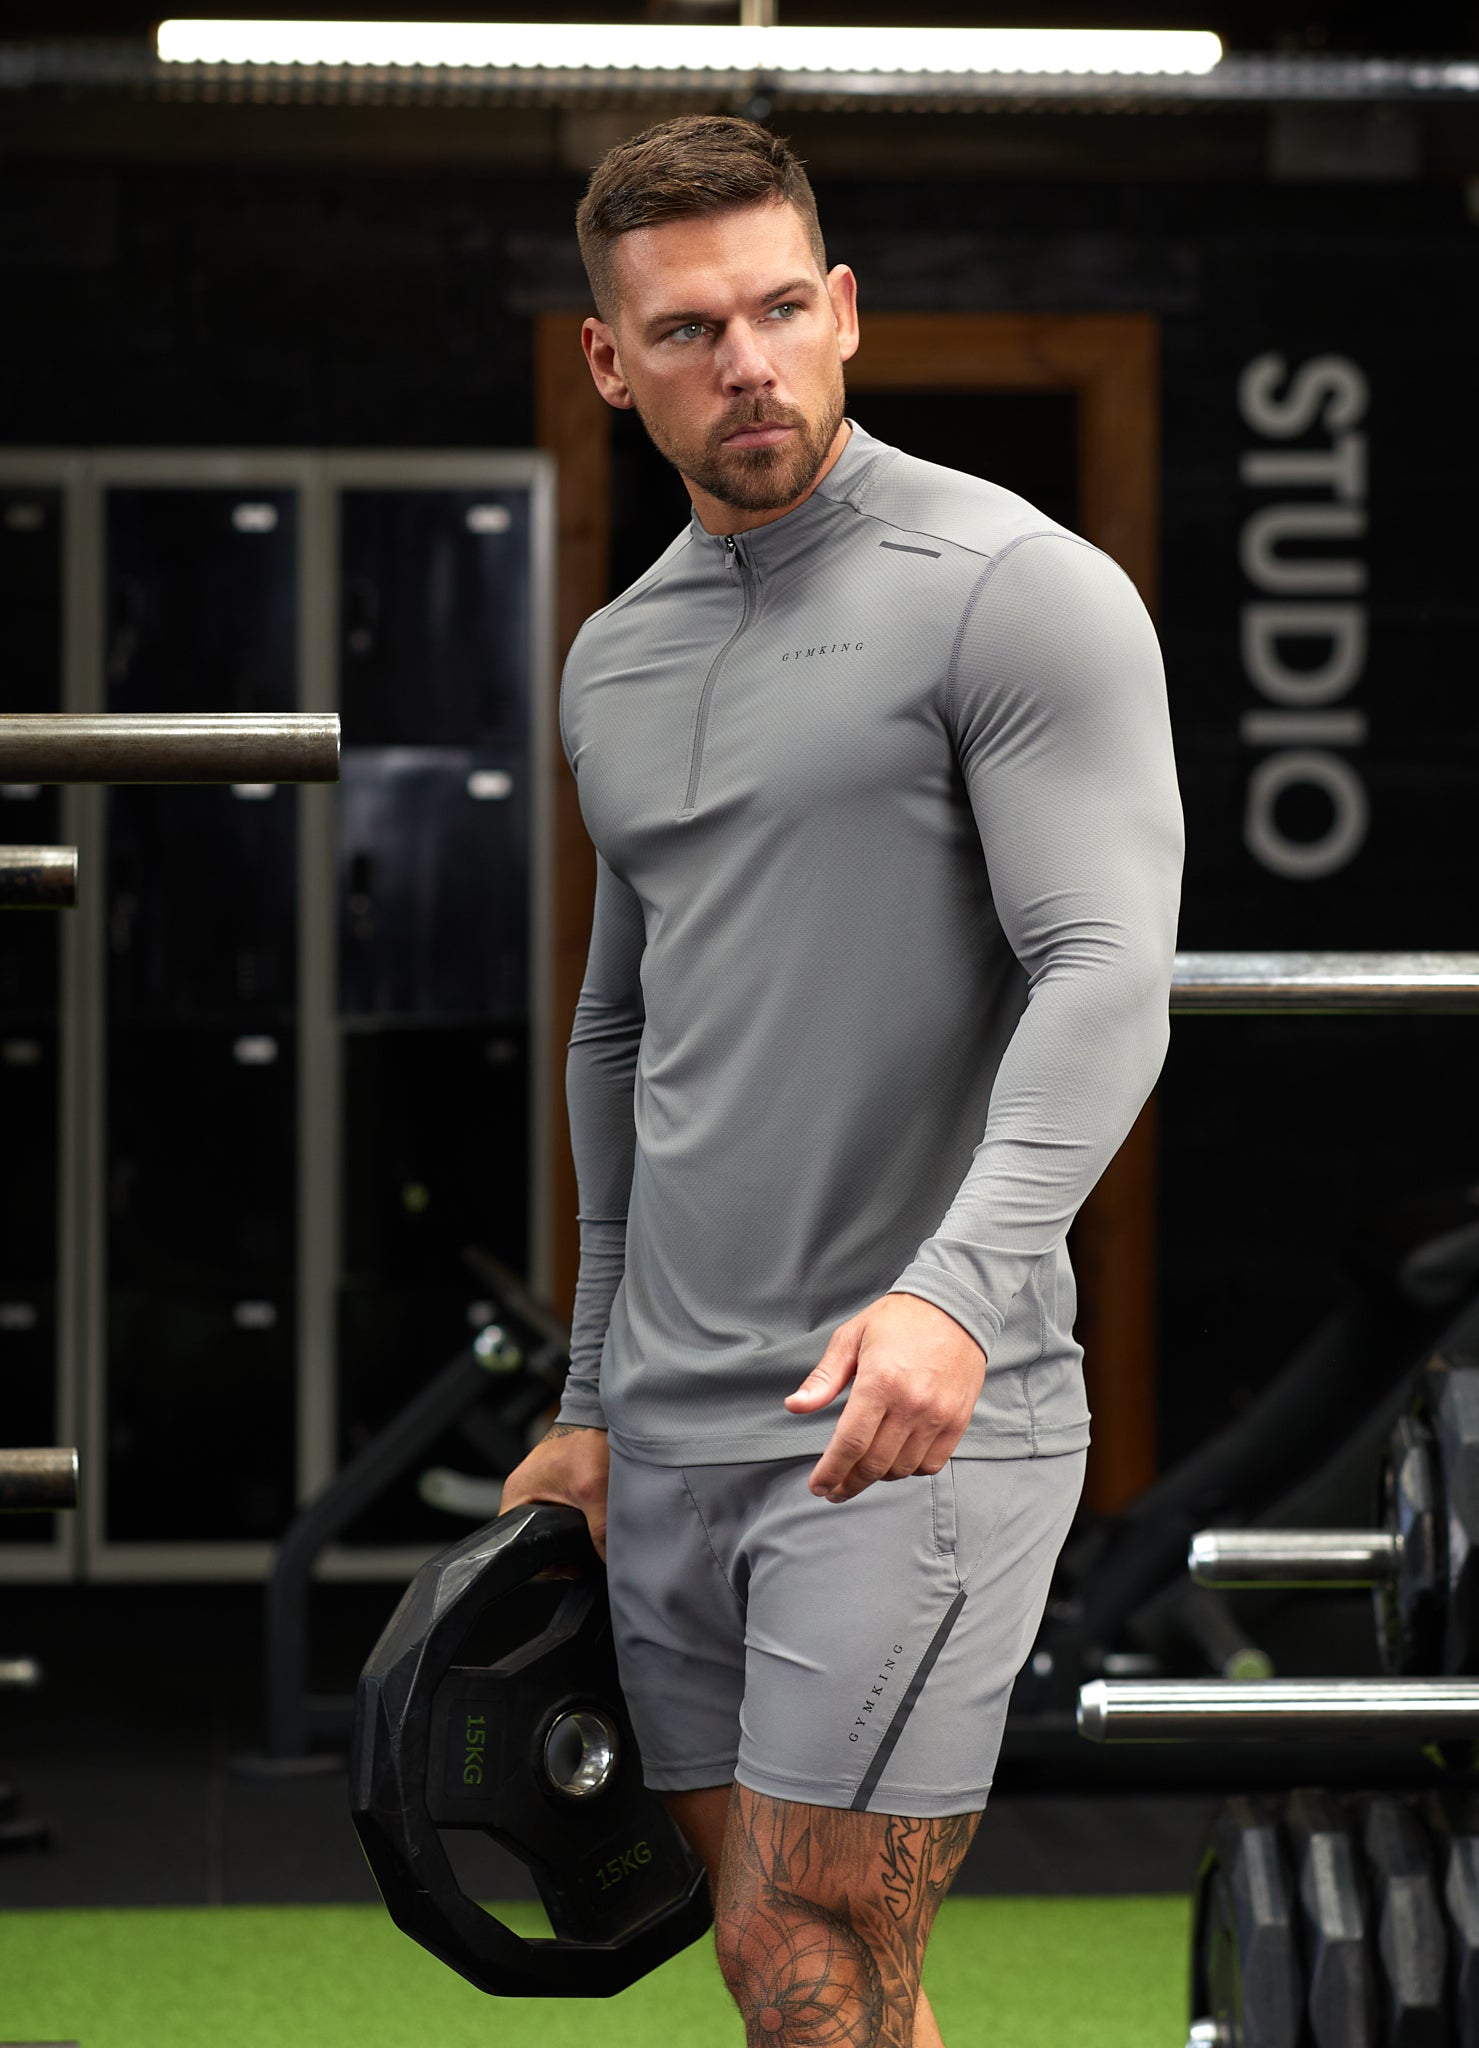 Men's Gym Clothes, Gym & Fitness Wear